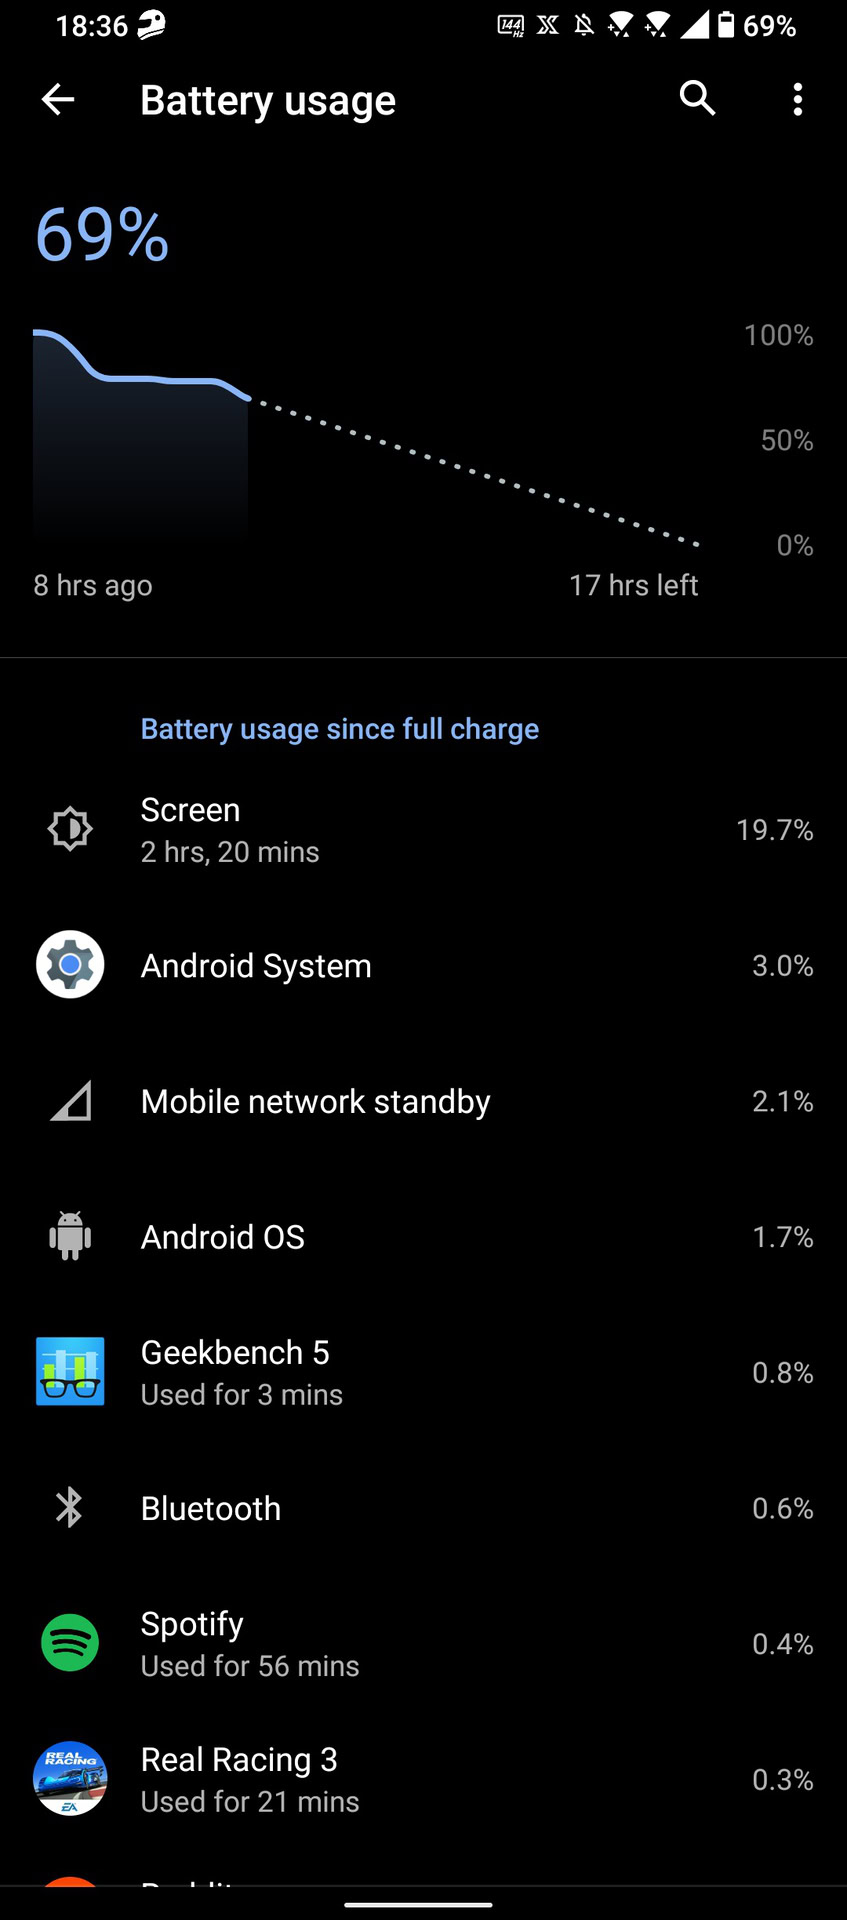 Asus ROG Phone 5 Battery life over a light day